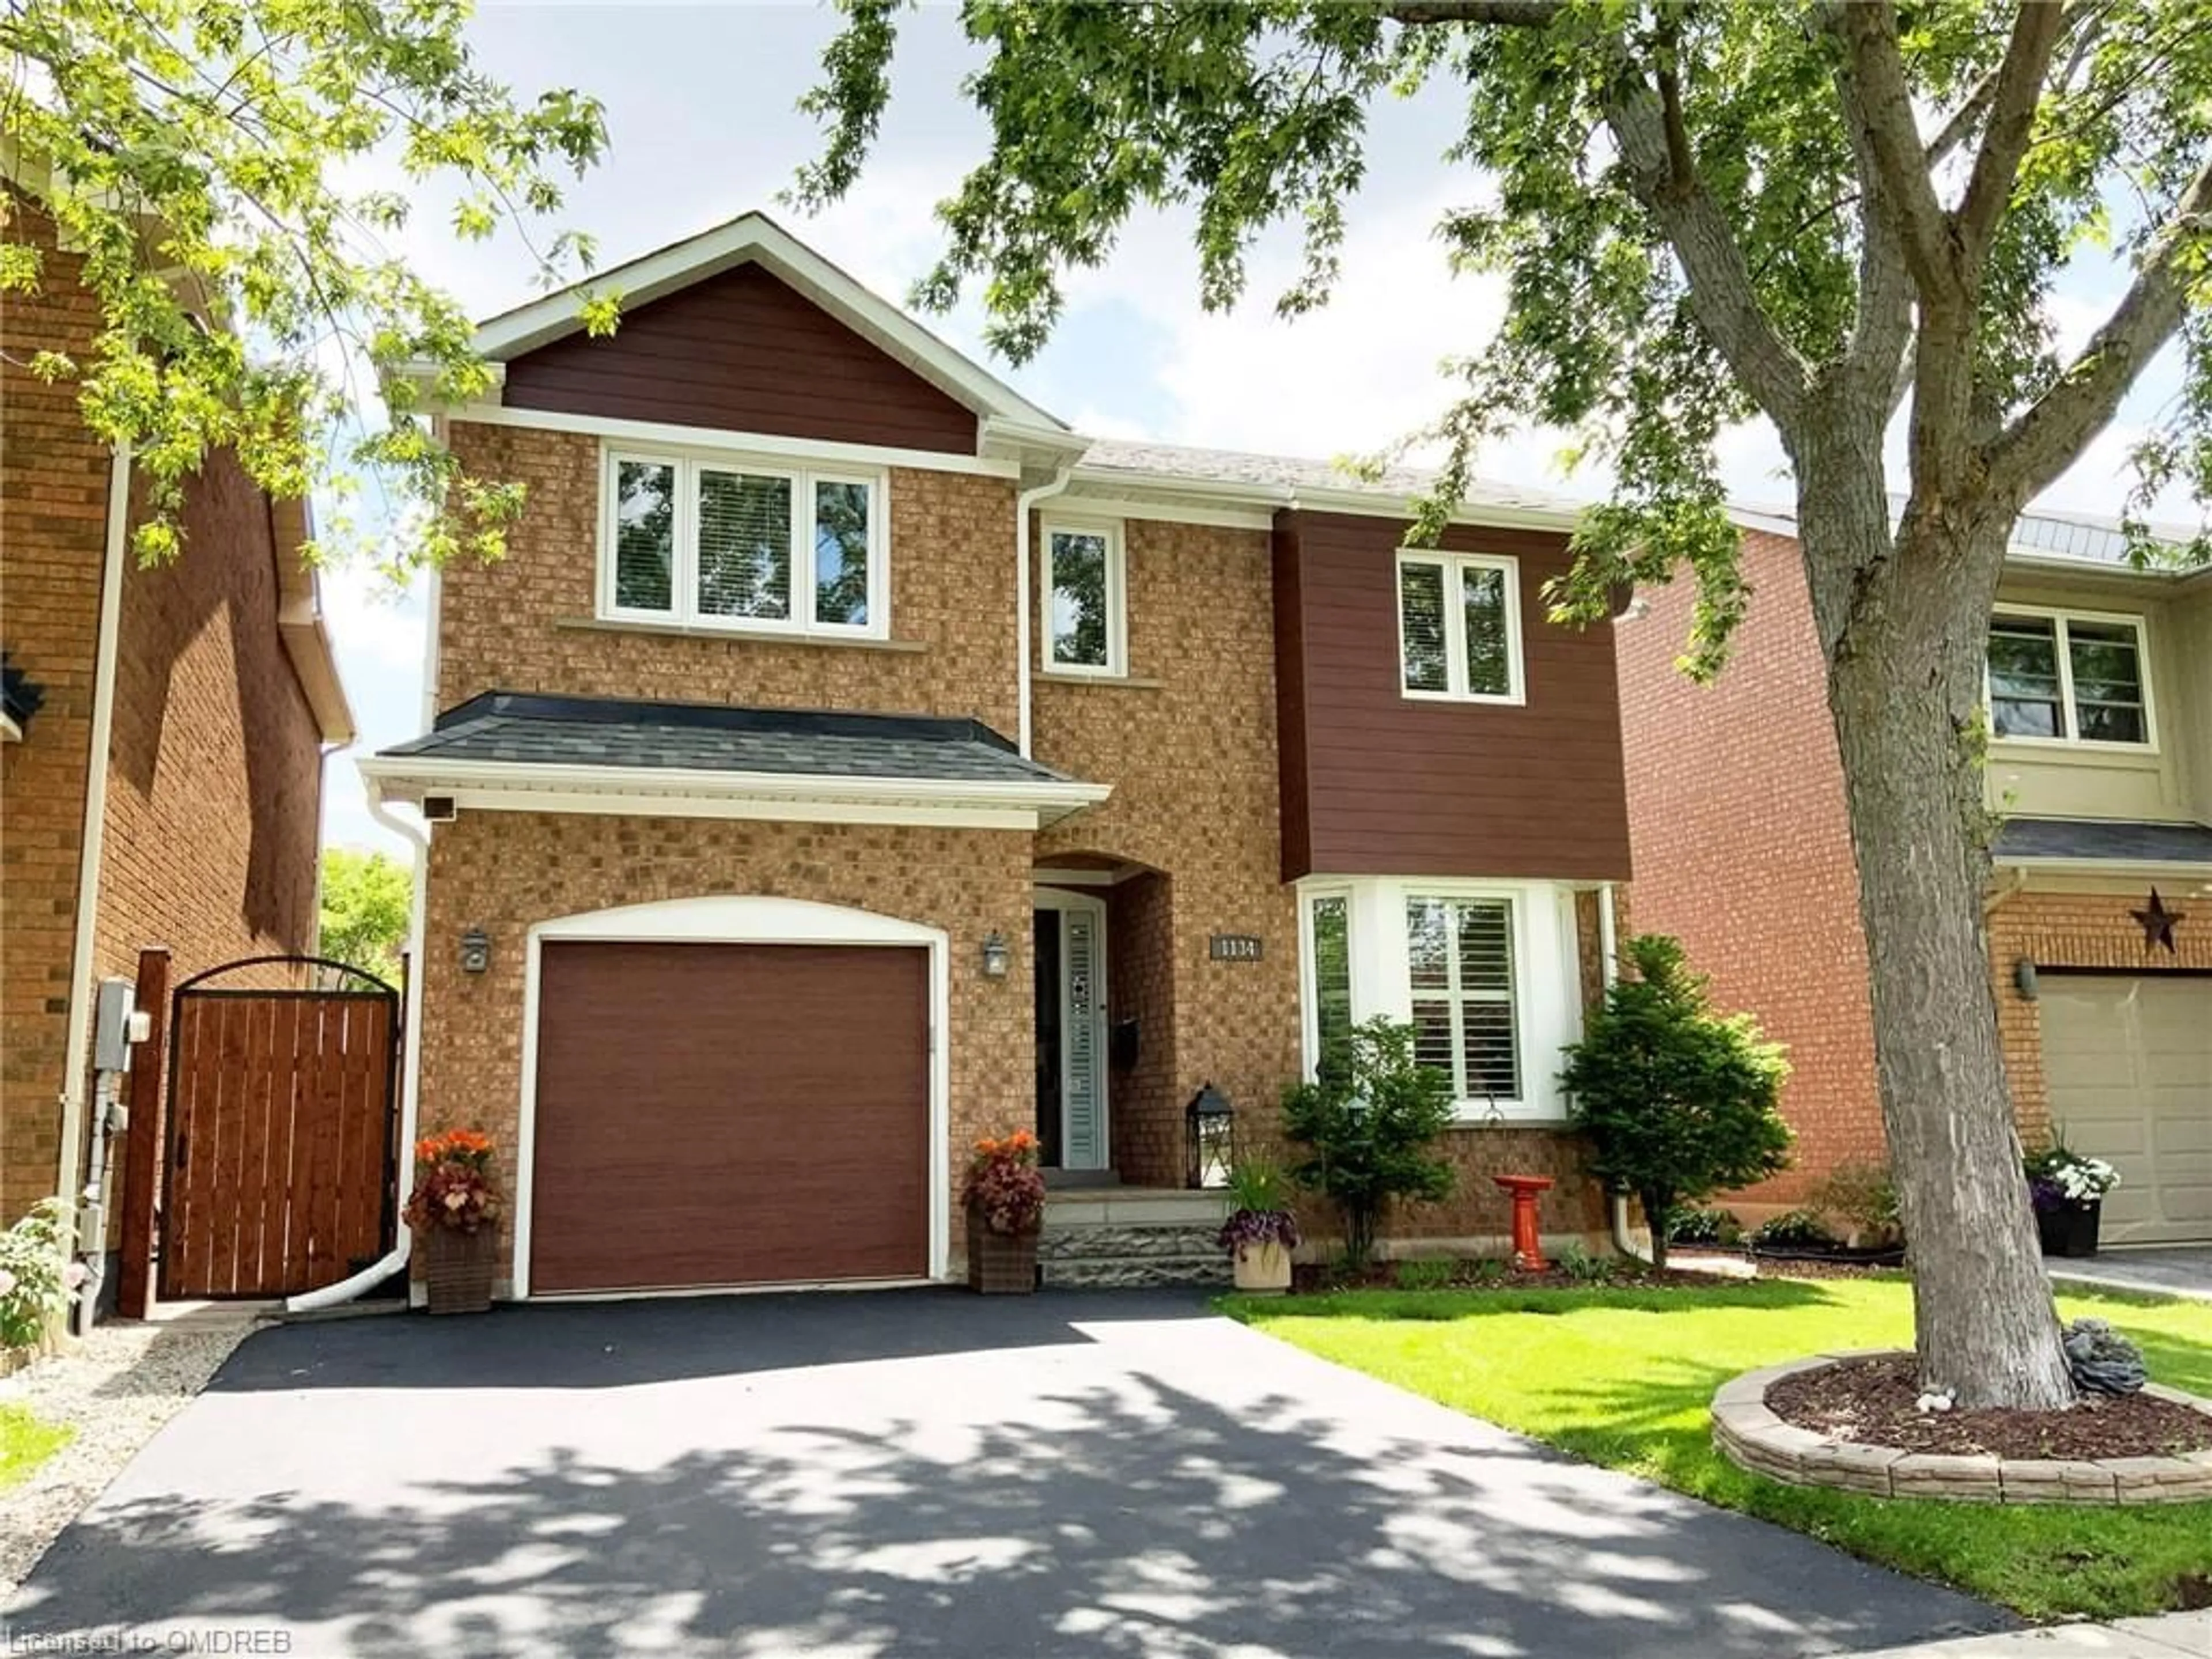 Home with brick exterior material for 1134 Glen Valley Rd, Oakville Ontario L6M 3K8